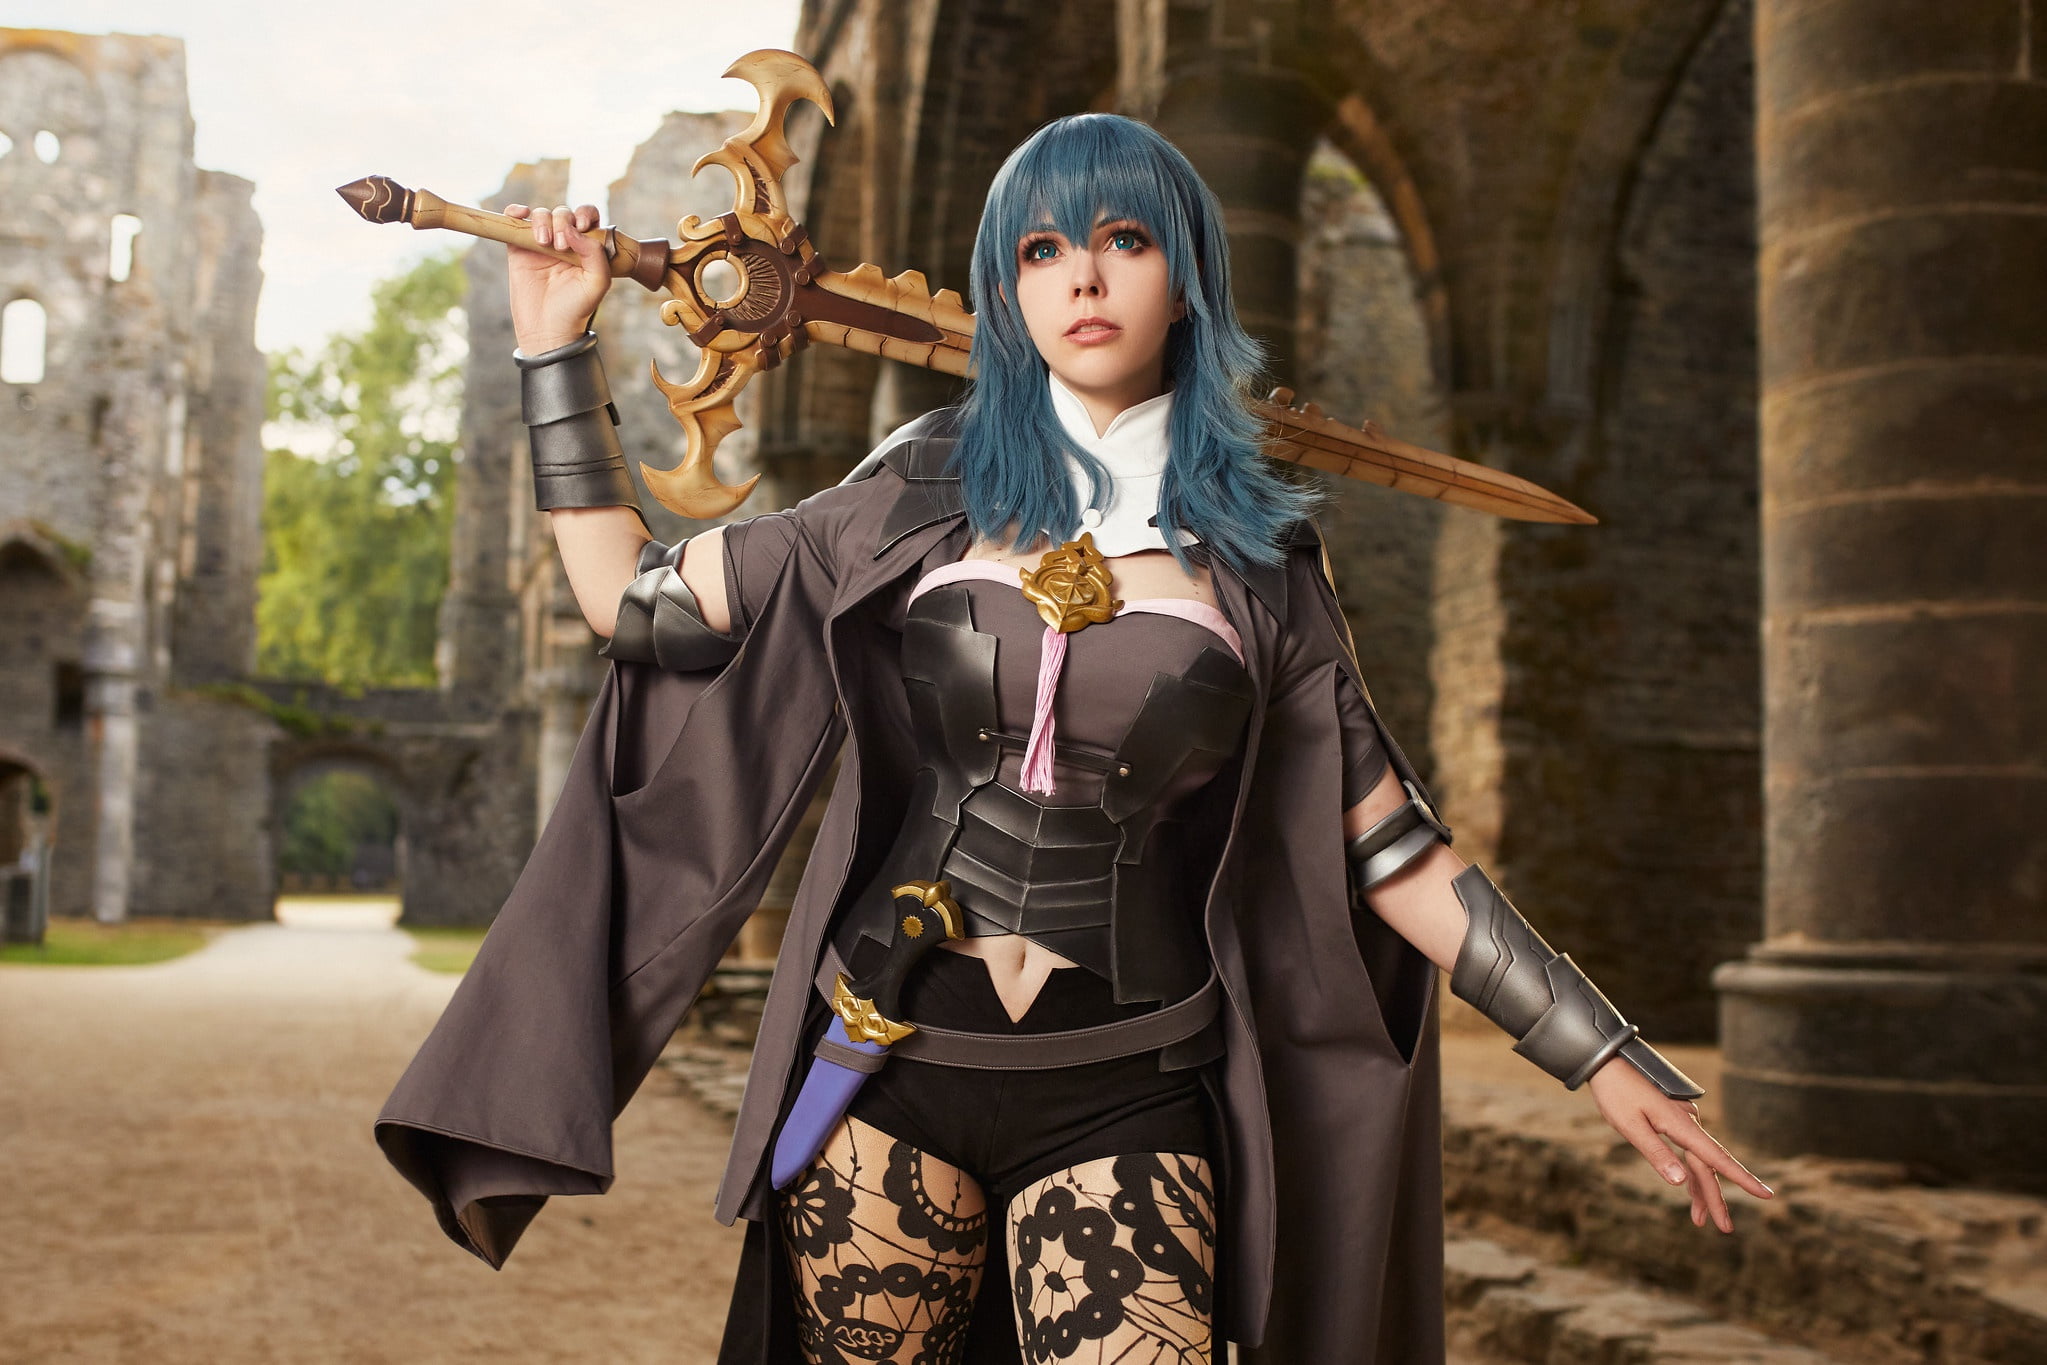 cosplay, Fire Emblem, video games, video game girls, video game characters